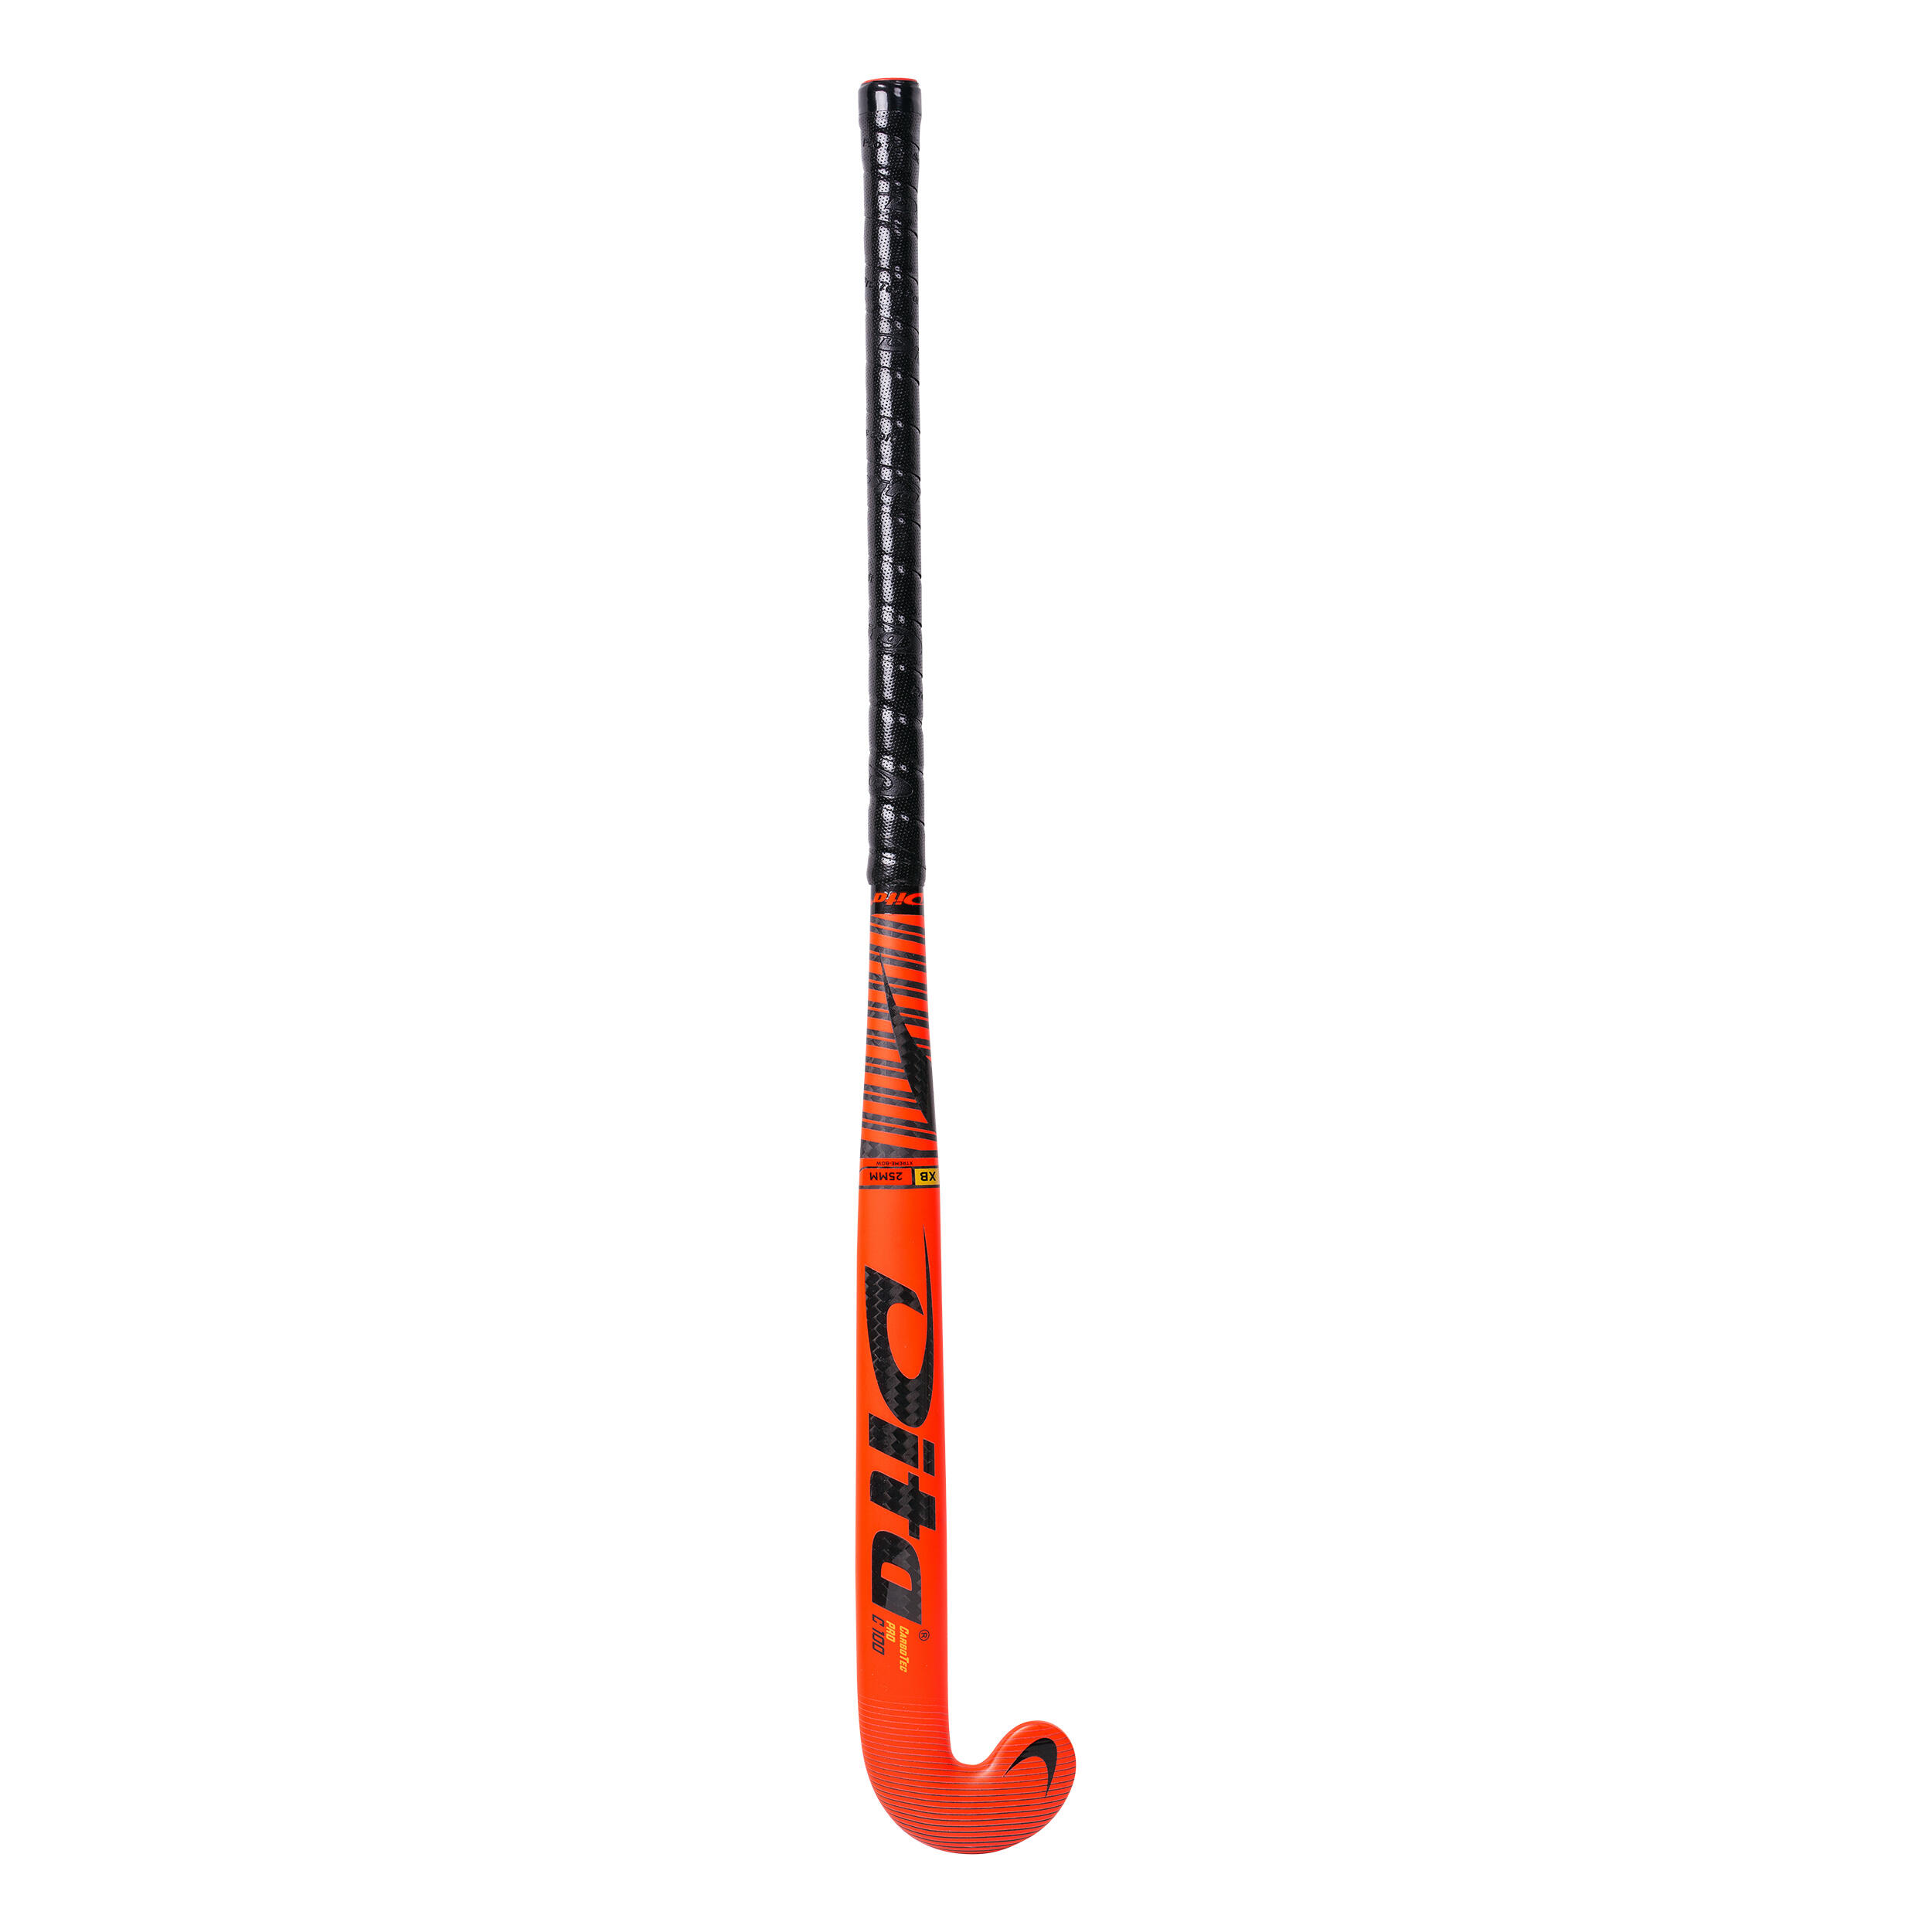 Adult Advanced Indoor Hockey Stick XLB 100% Carbon CarboTecPro - Red/Black 2/3